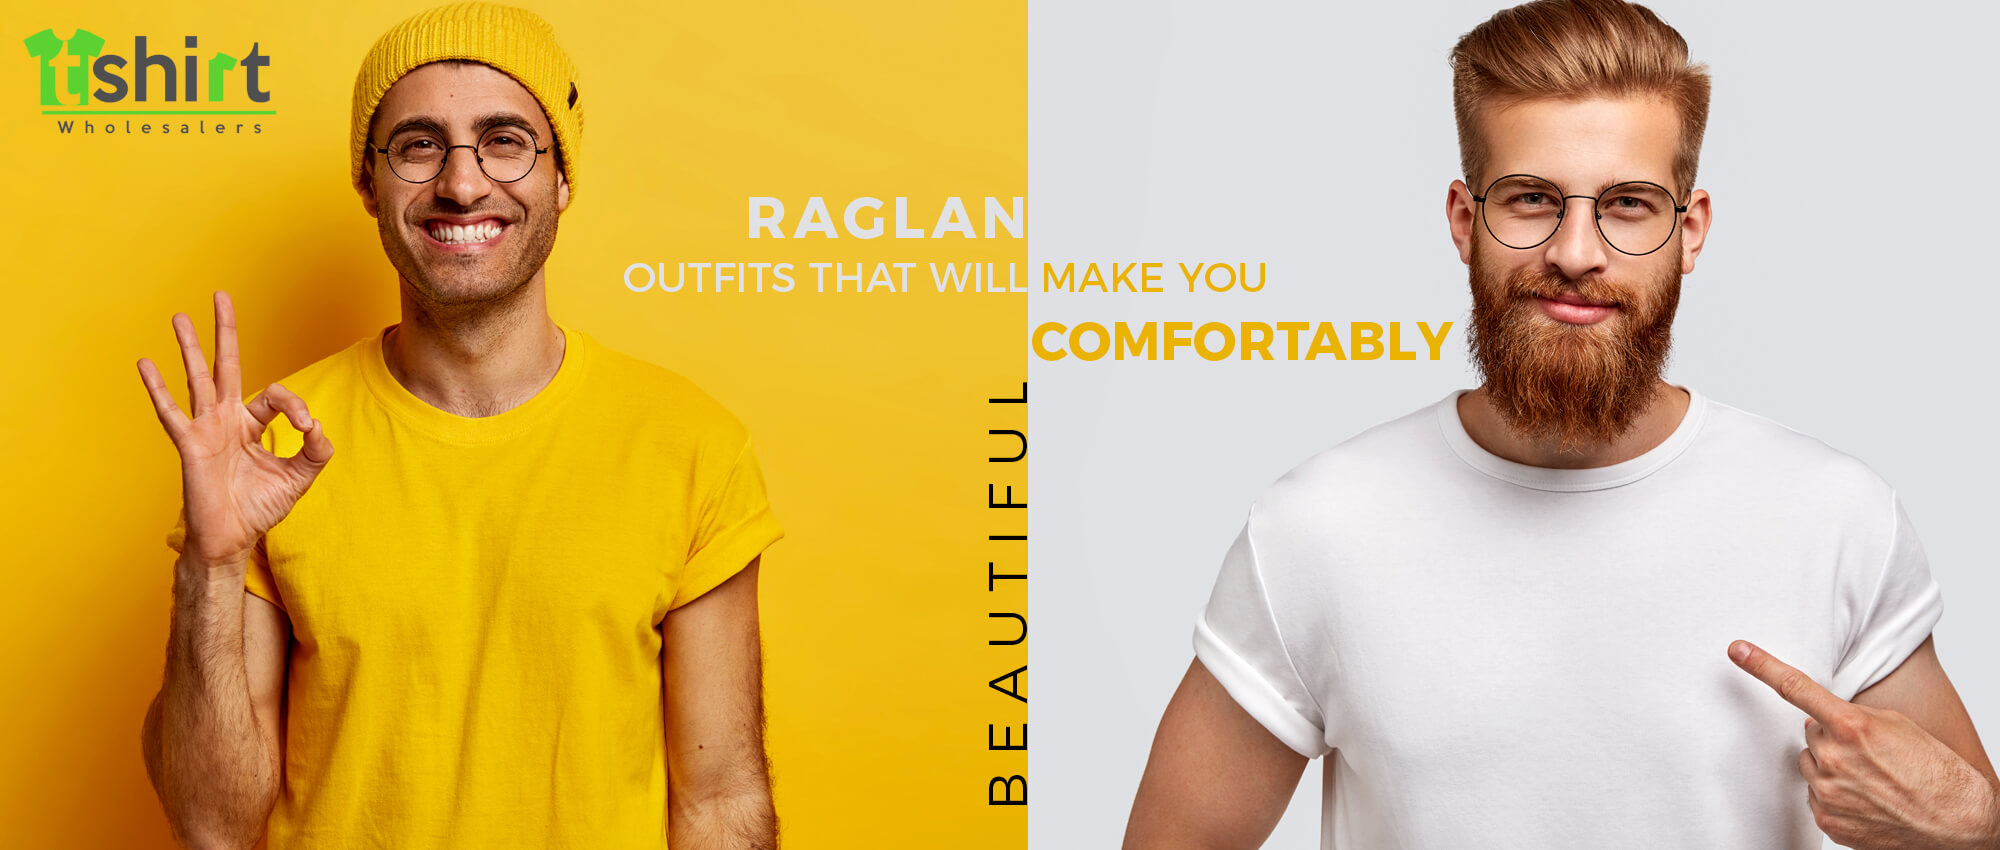 RAGLAN OUTFITS THAT WILL MAKE YOU COMFORTABLY BEAUTIFUL